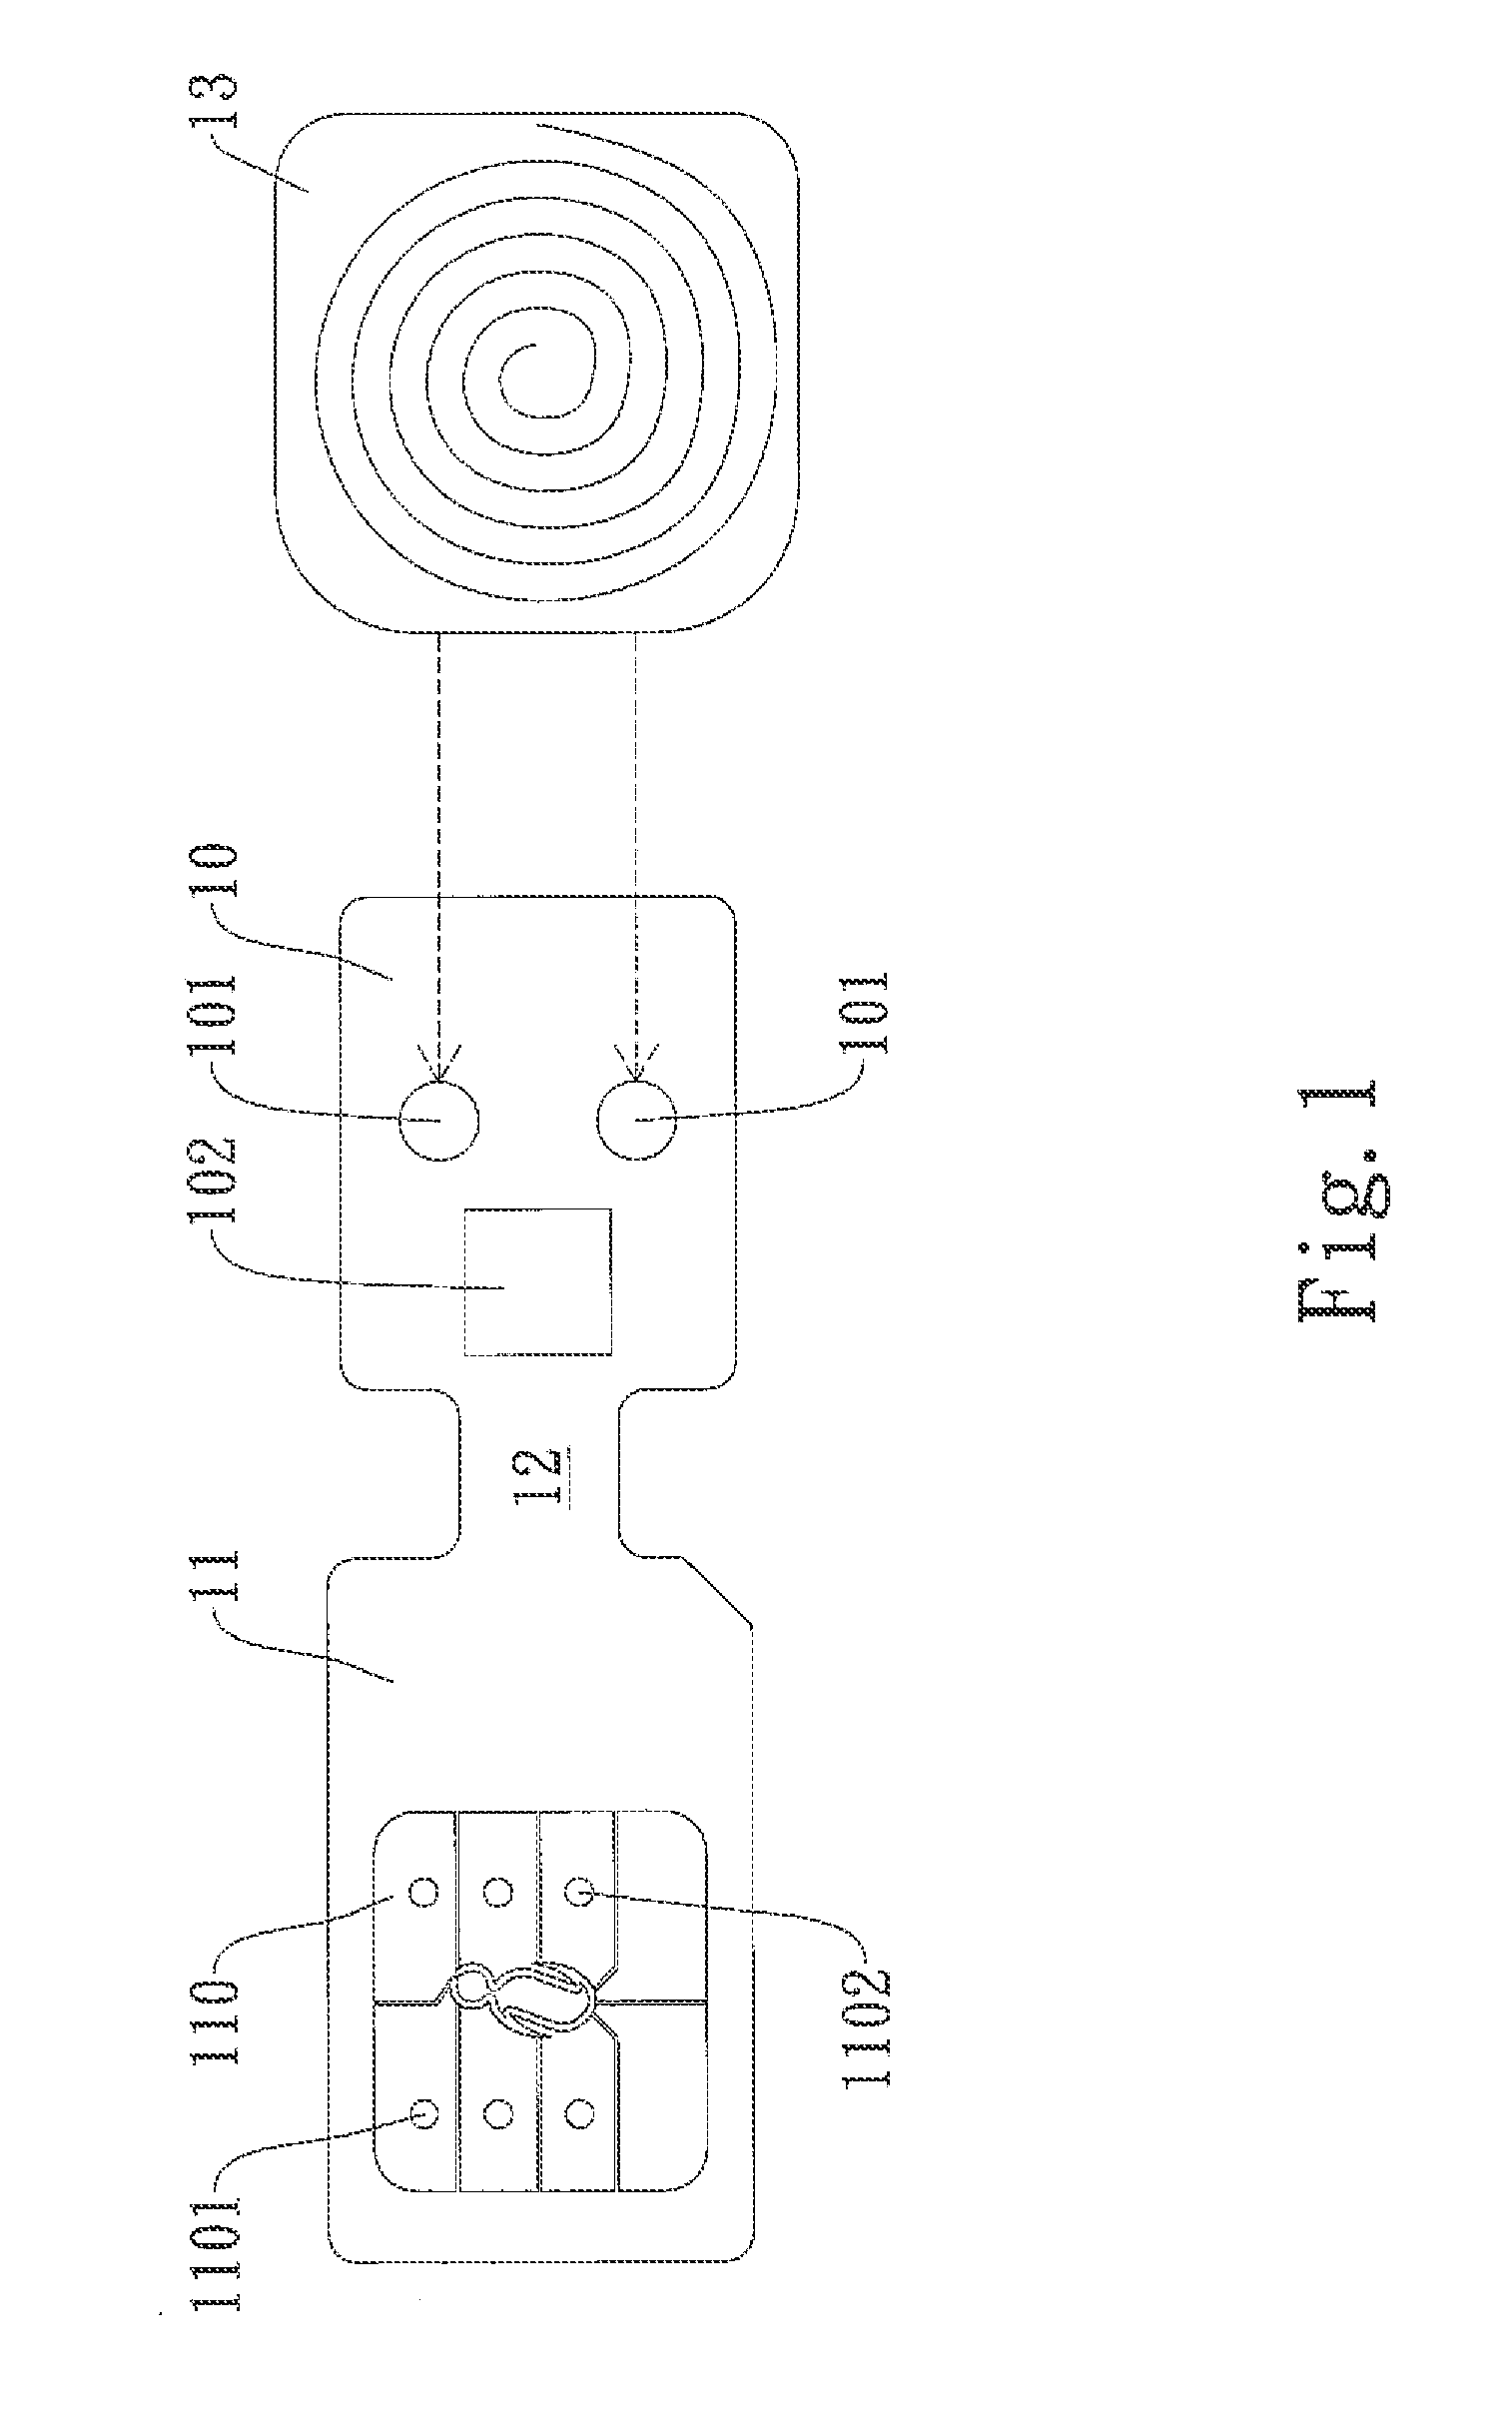 Signal Processing Device